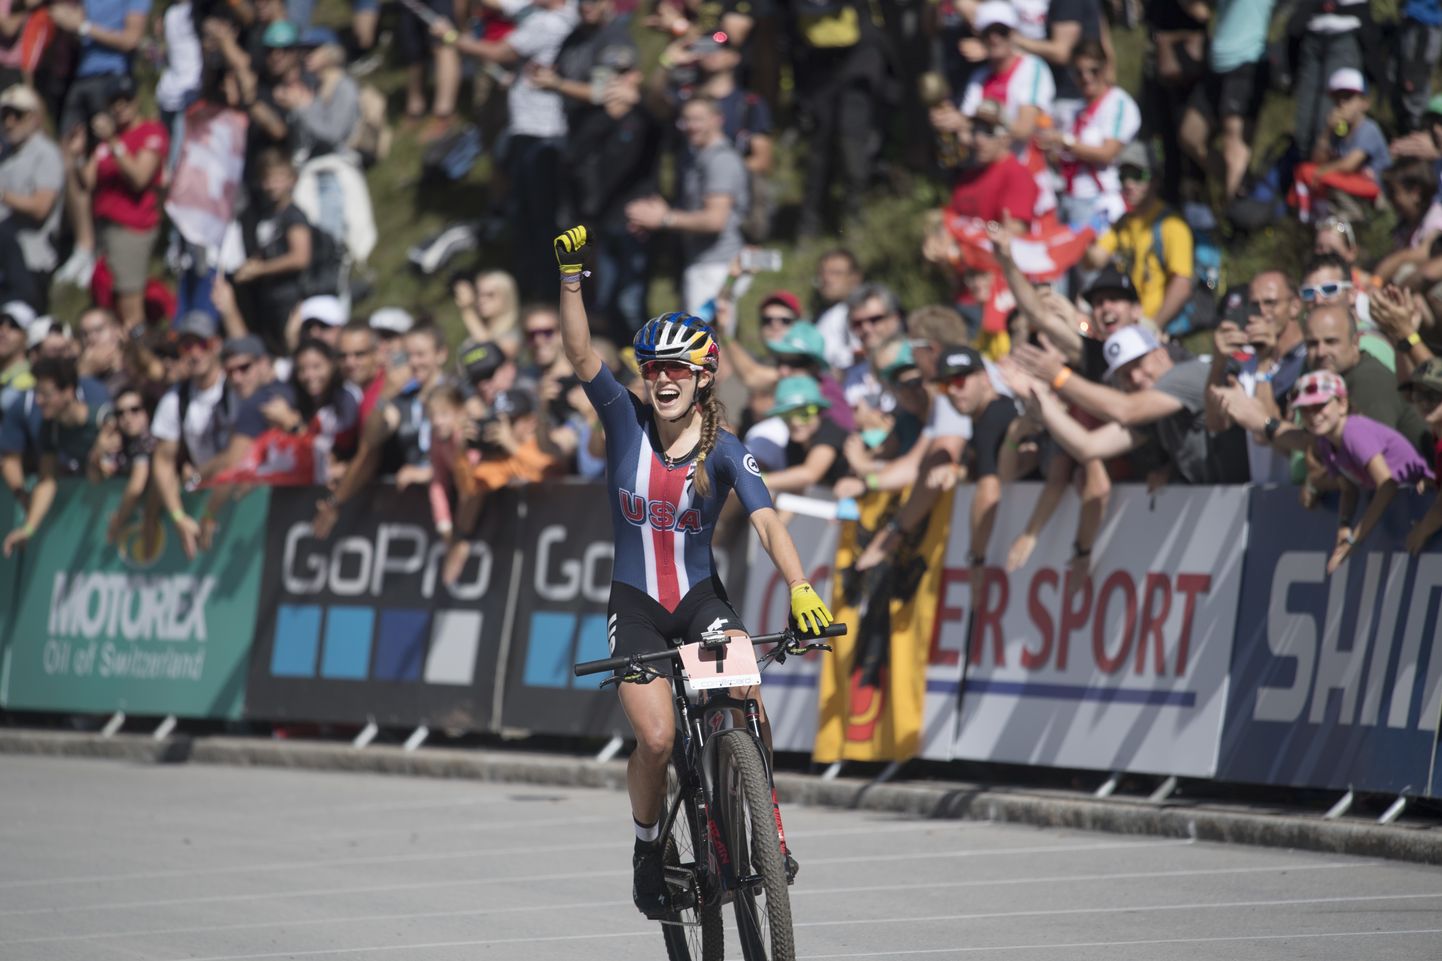 Kate Courtney from the U.S wins the women's elite cross country olympic race at the UCI mountain bike world championships in Lenzerheide, Switzerland, Saturday, Sept. 8, 2018. The World Championships takes place from Sept. 5 till Sept. 9, 2018. (Gian Ehrenzeller/Keystone via AP)